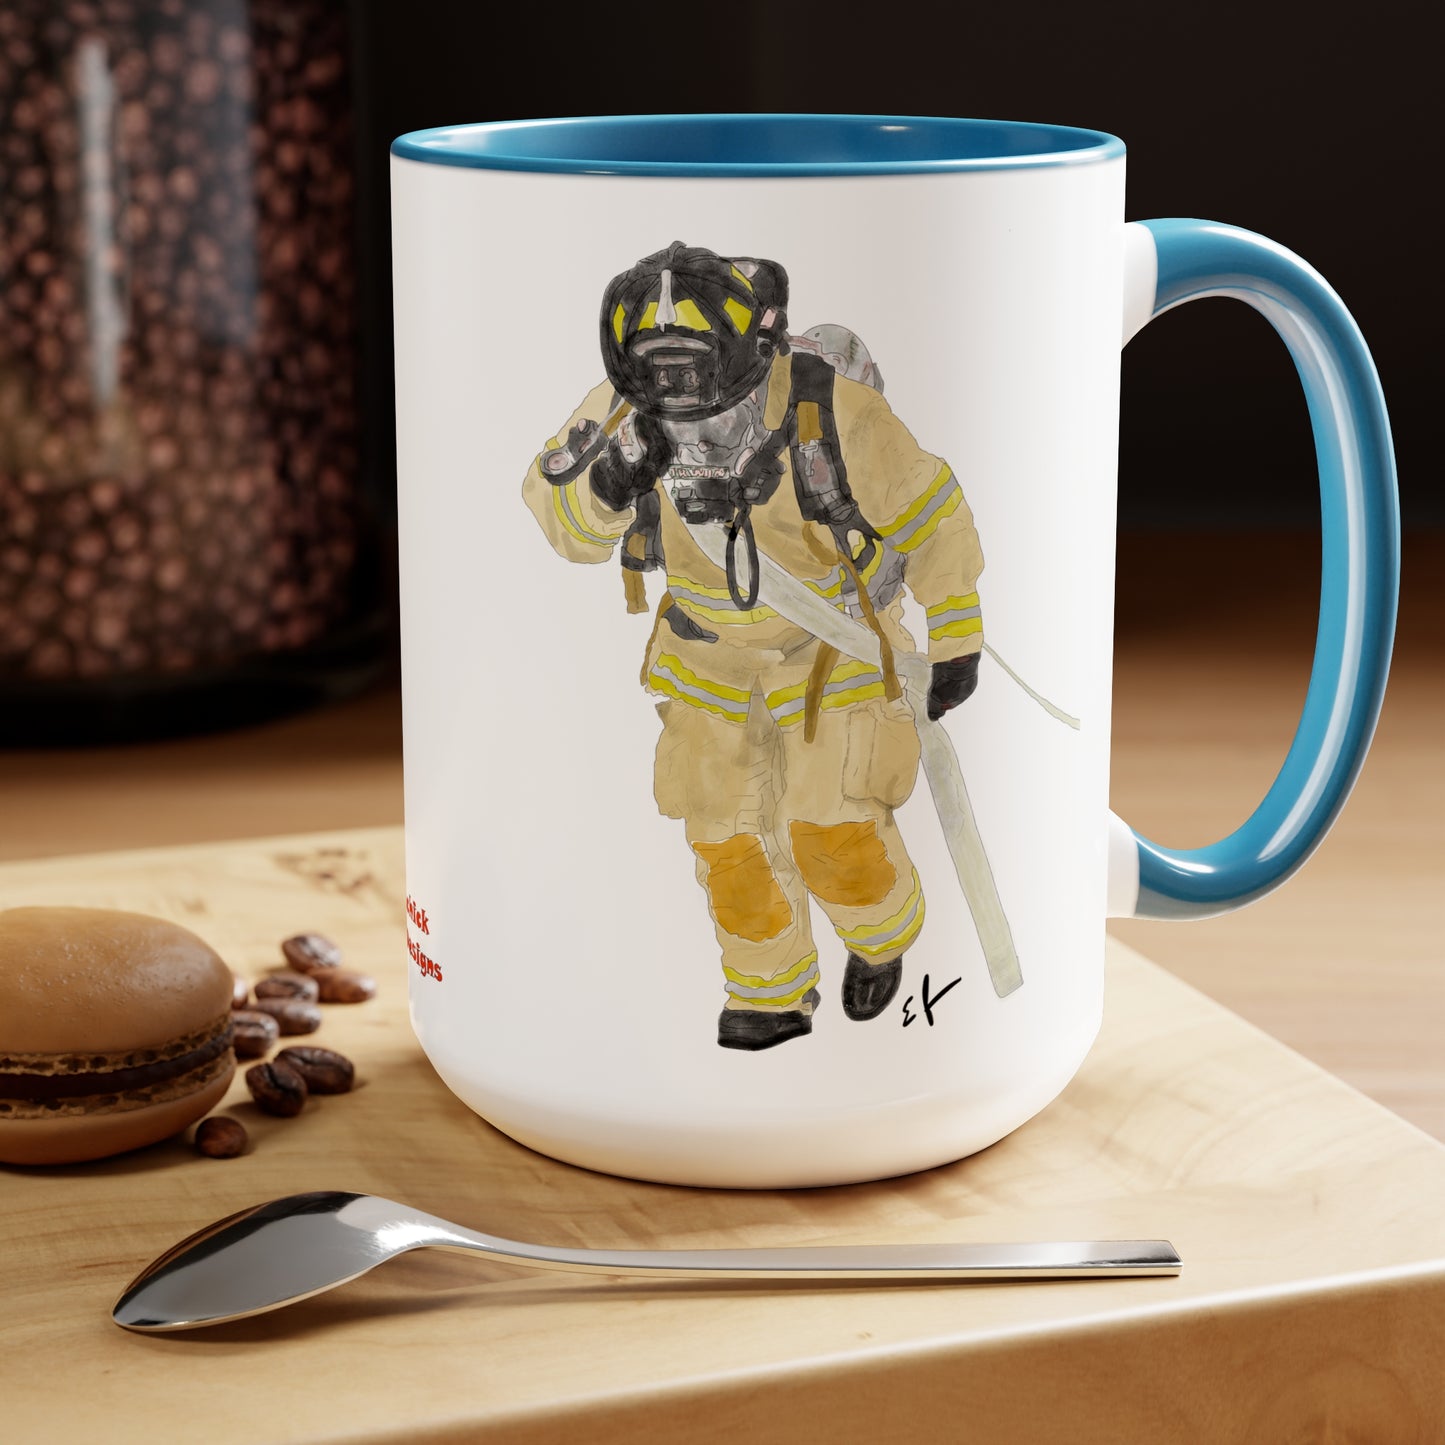 Firechick Designs "Retired Hose Dragger"  Firefighter Two-Tone Coffee Mugs, 15oz Firefighters Gifts Retirement Gift Mug Cup